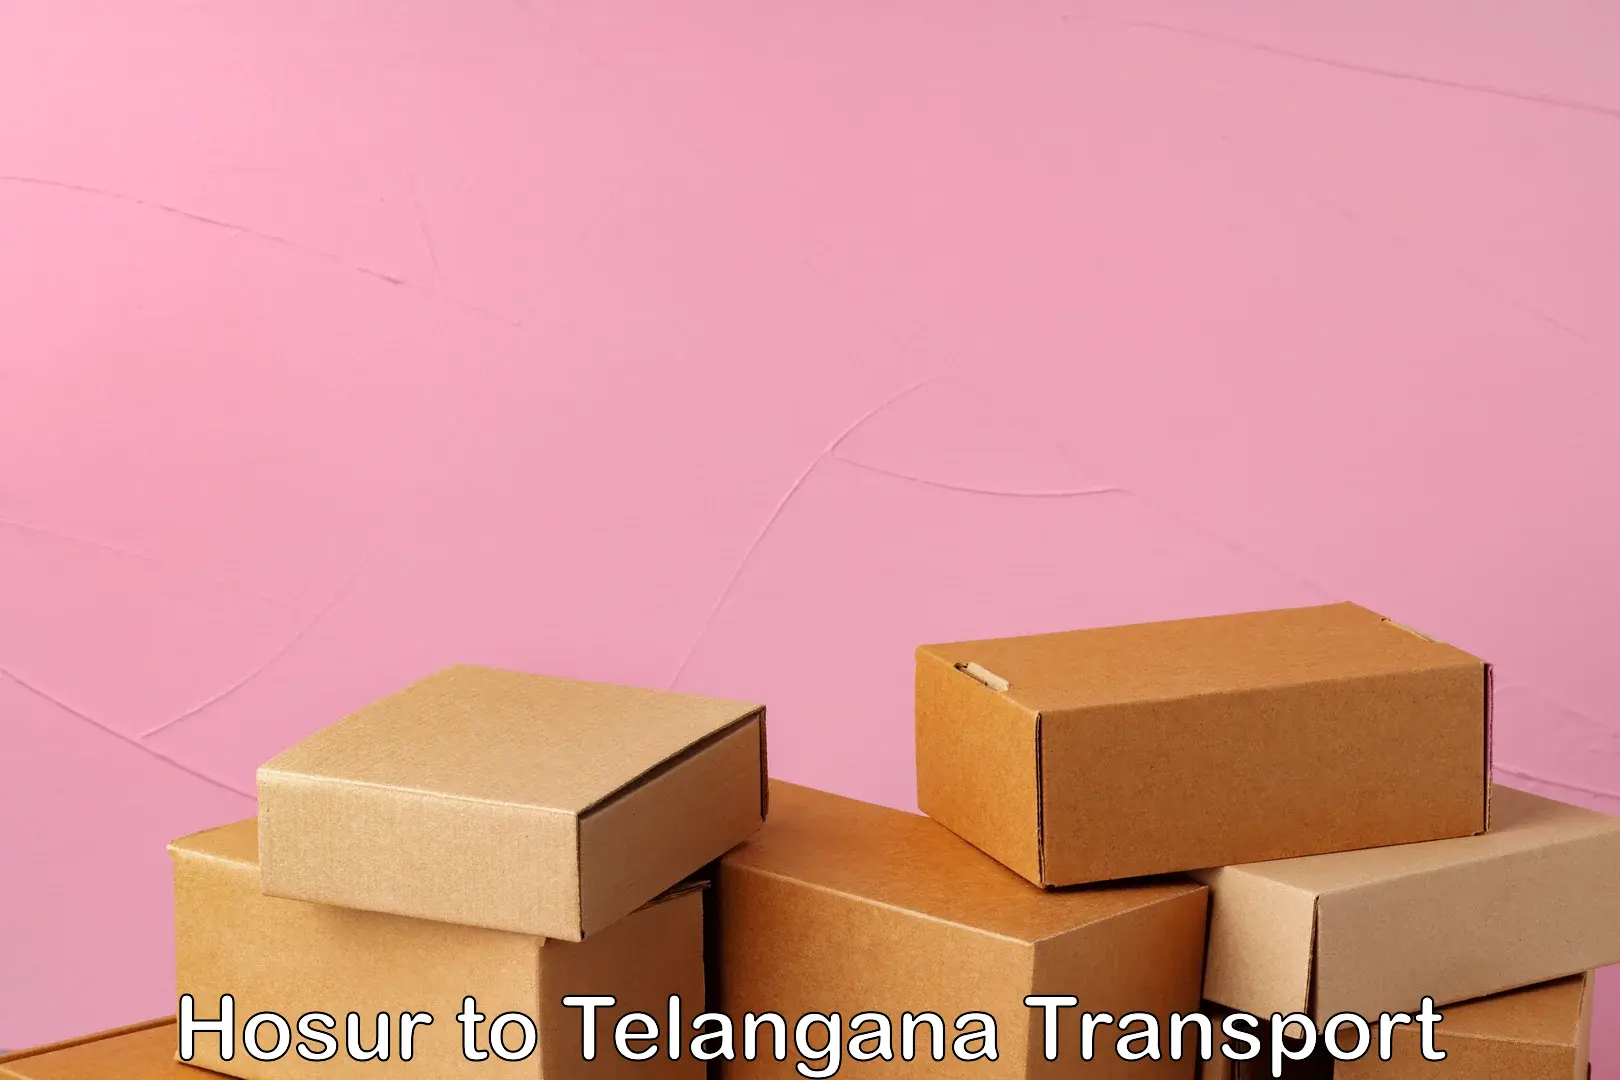 Container transport service Hosur to Jangaon